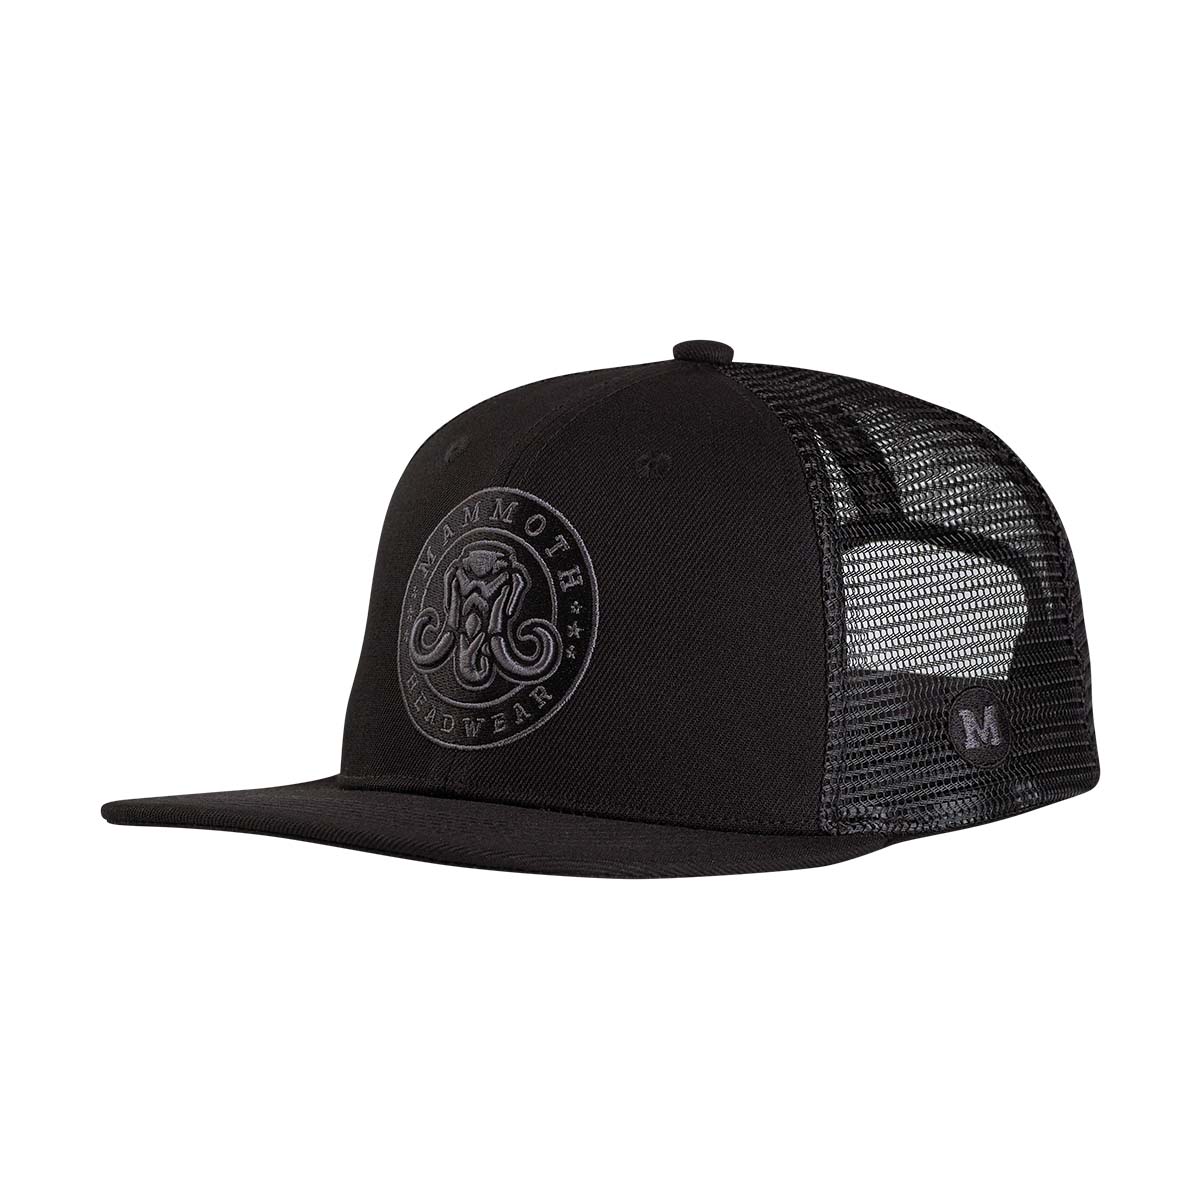 XXL Backed Out Classic Trucker Hat from Mammoth Headwear